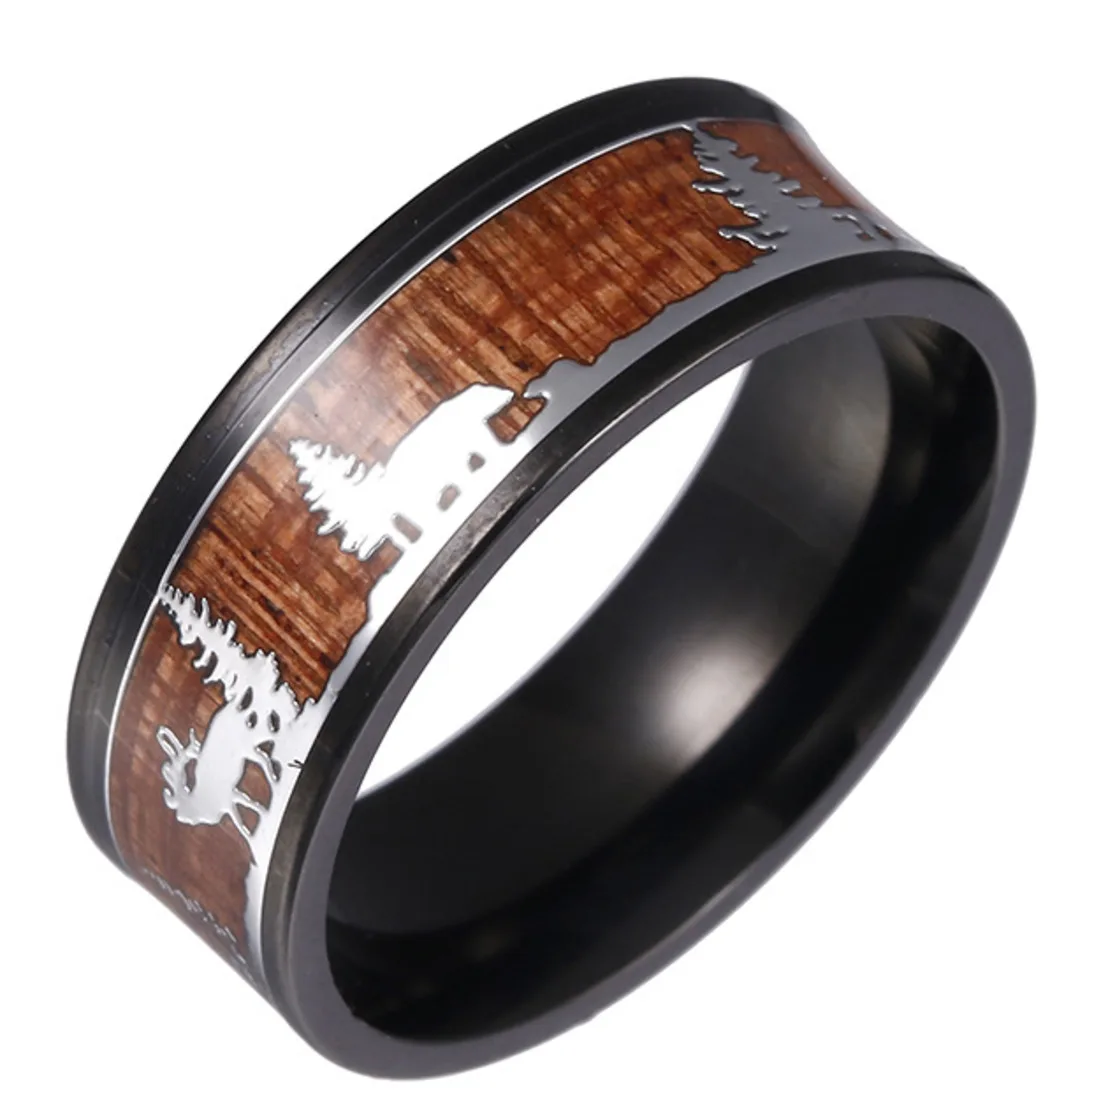 

Unisex Black Stainless Steel Hunting Ring Wedding Band Wood Inlay Deer Stag Silhouette Christmas Present Rings For Women